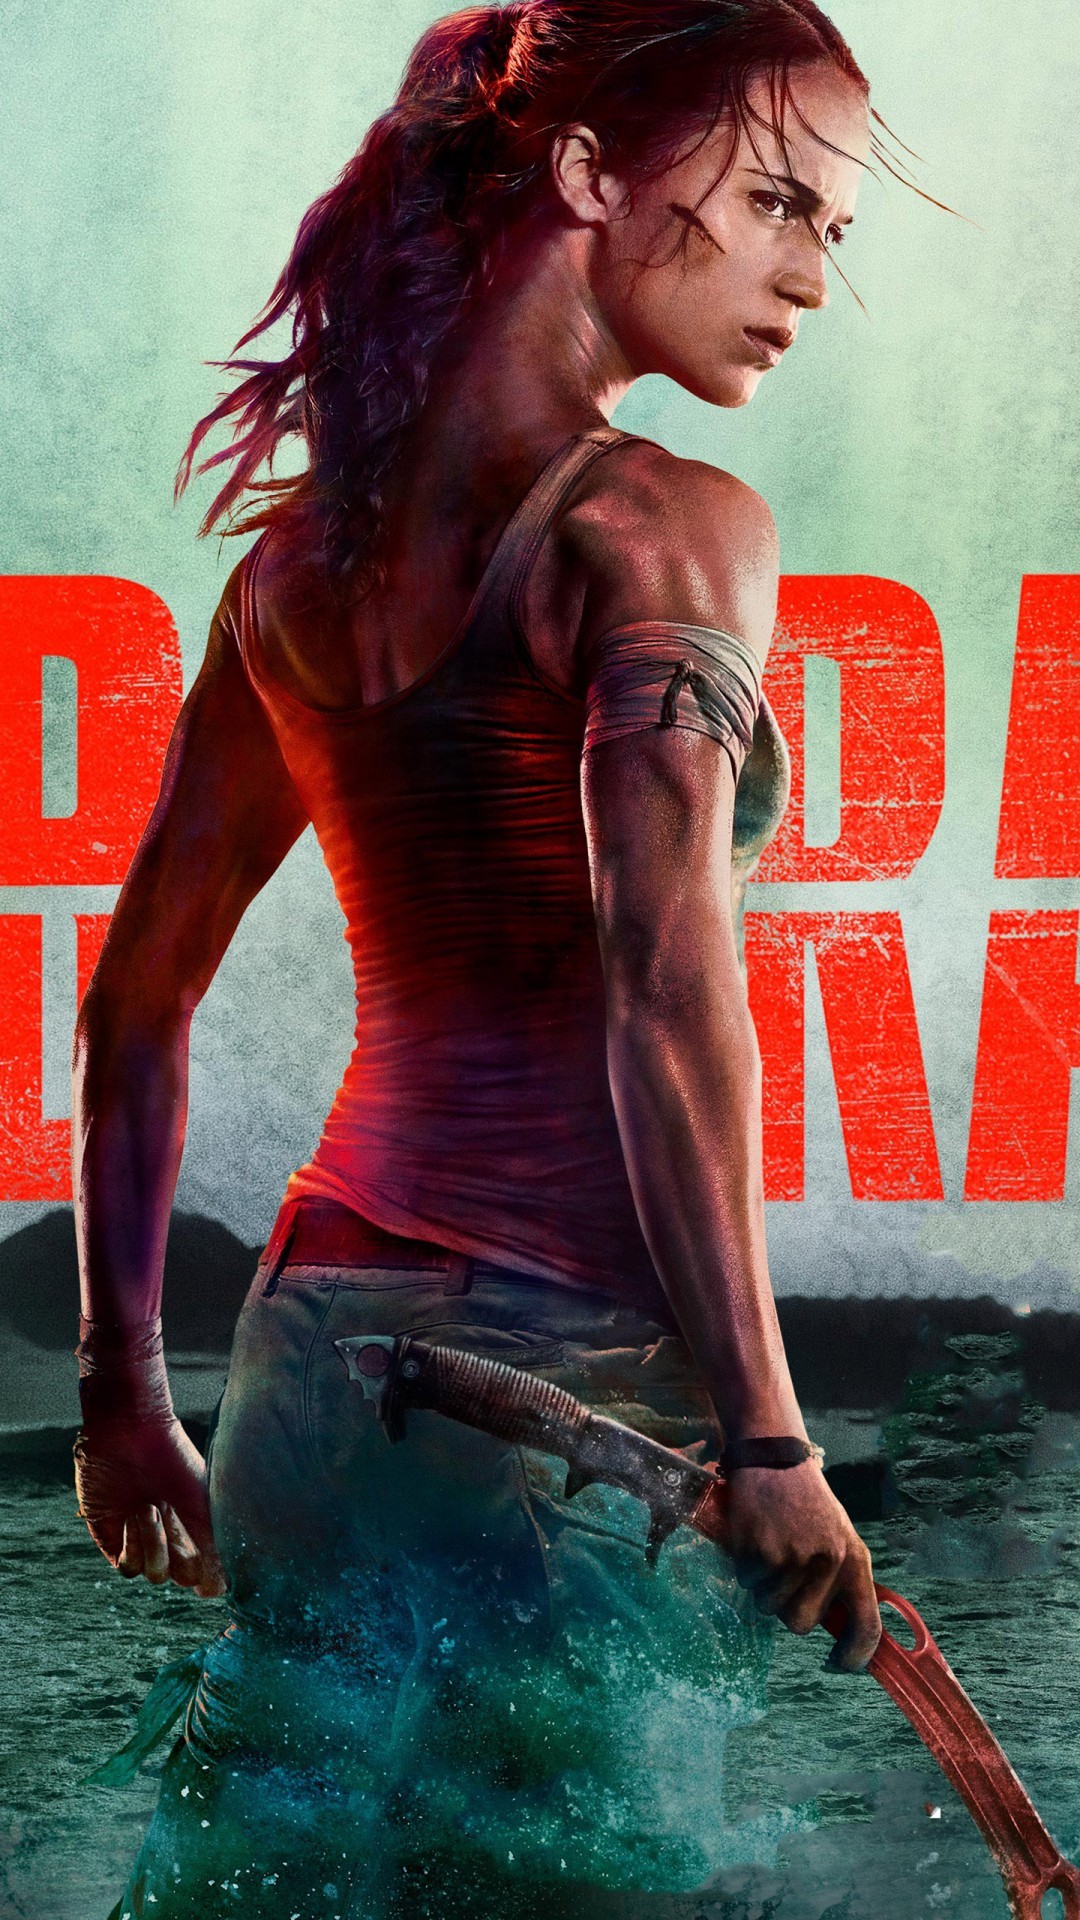 tomb raider hd wallpaper,cool,poster,photography,fictional character,movie